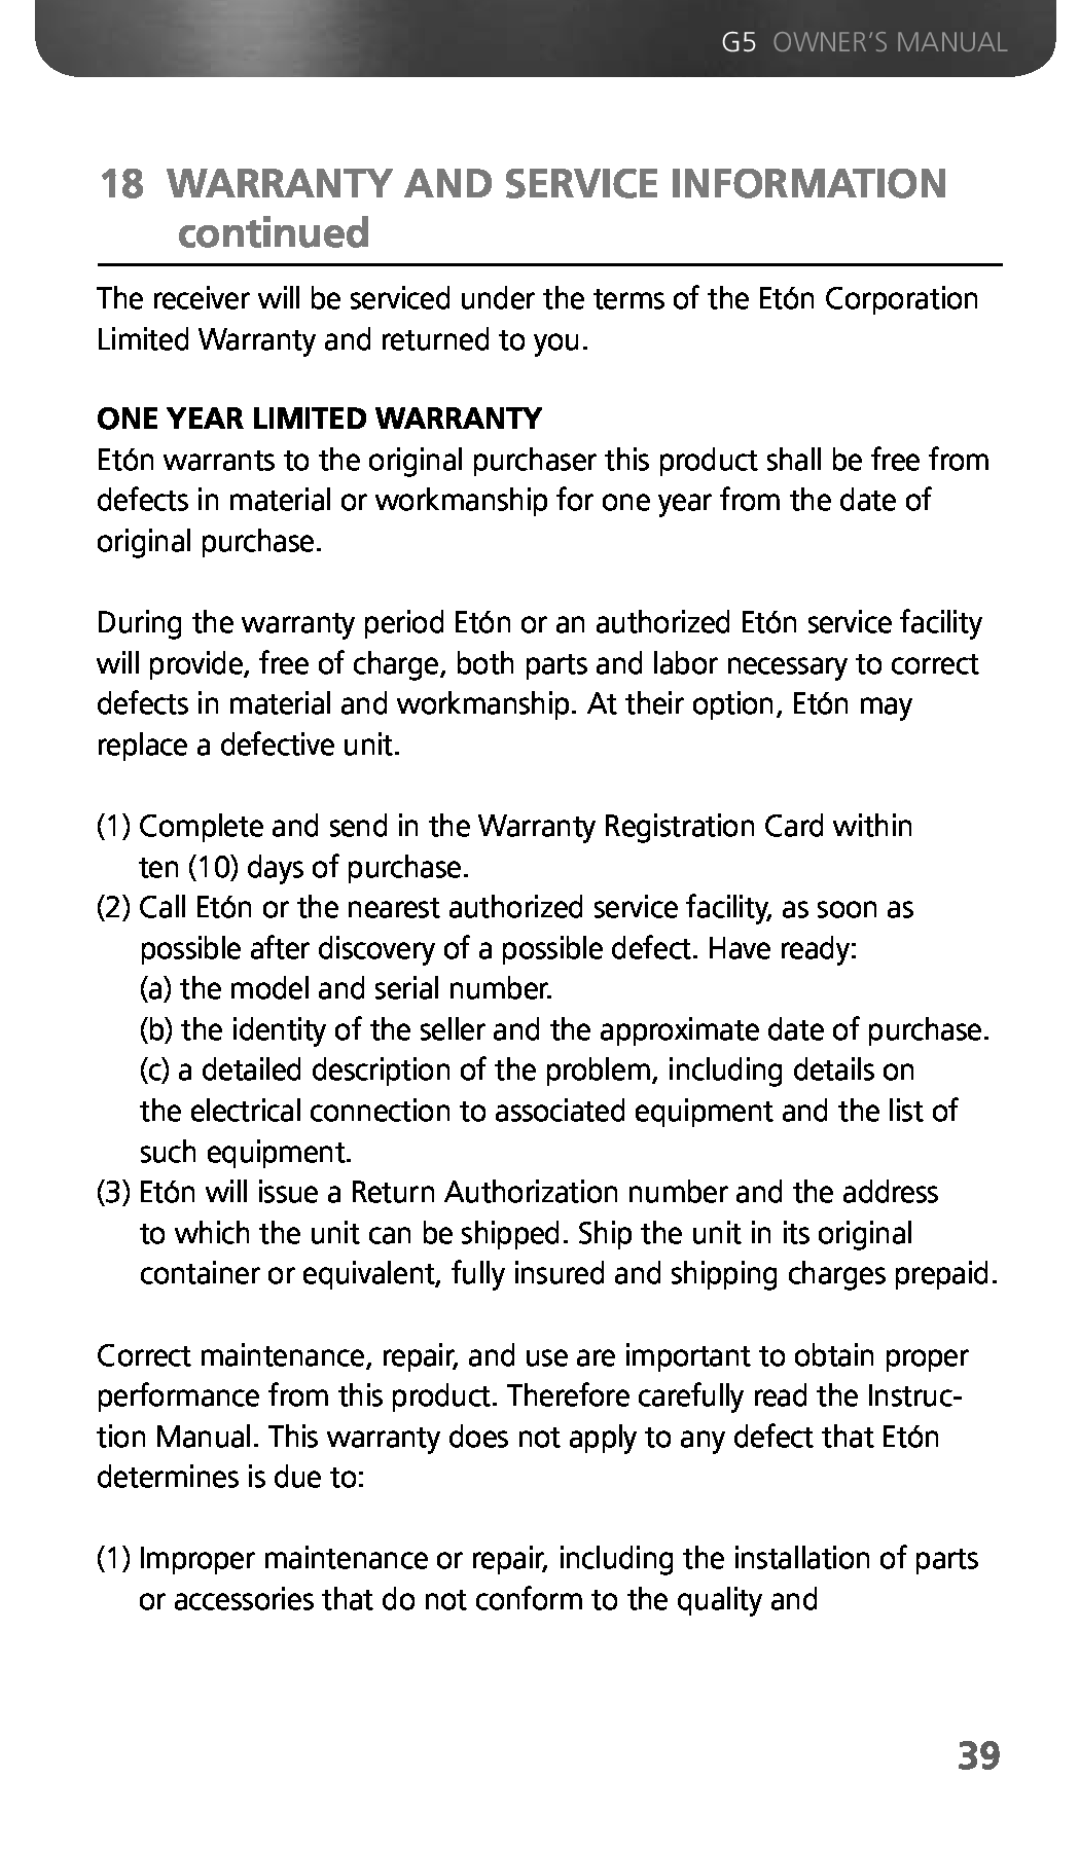 Eton G5 owner manual WARRANTY AND SERVICE INFORMATION continued, One Year Limited Warranty 